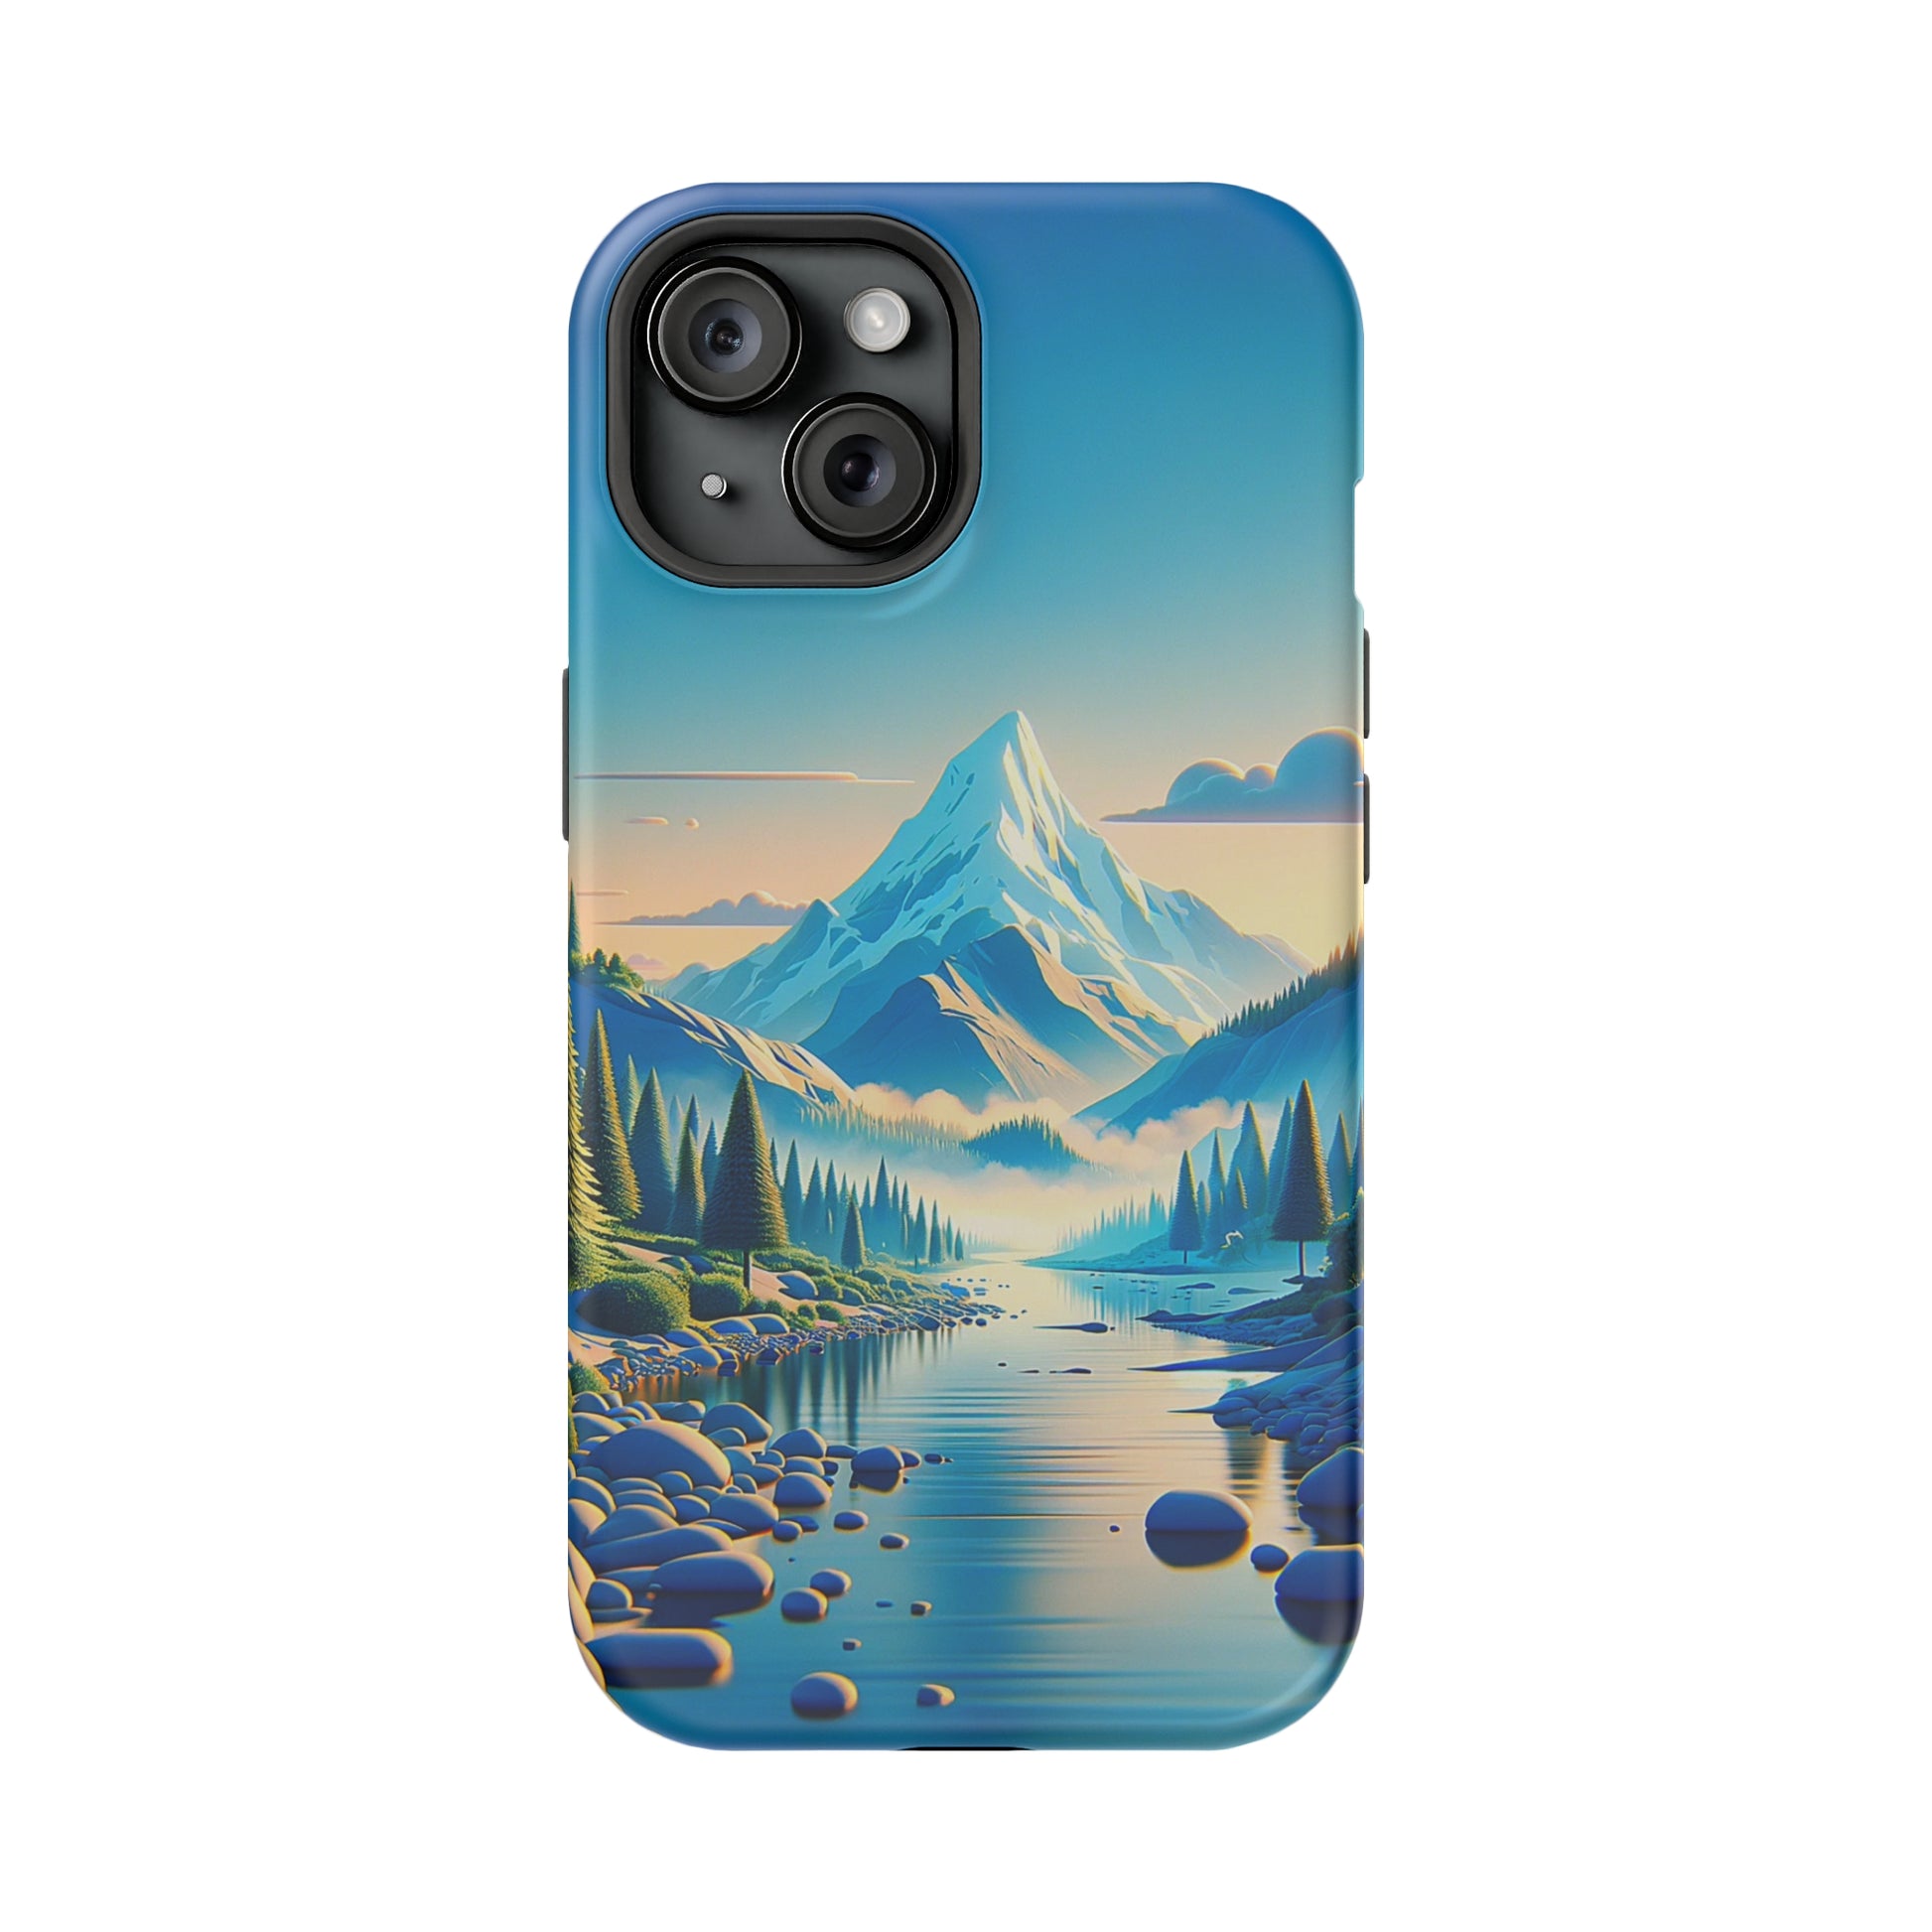 Alpine Serenity (iPhone MagSafe Case)Alpine Serenity MagSafe Durable Case: Style Meets Protection 📱✨
Upgrade your device with Rima Gallery's Alpine Serenity MagSafe Durable Case. This case isn’t just aRimaGallery